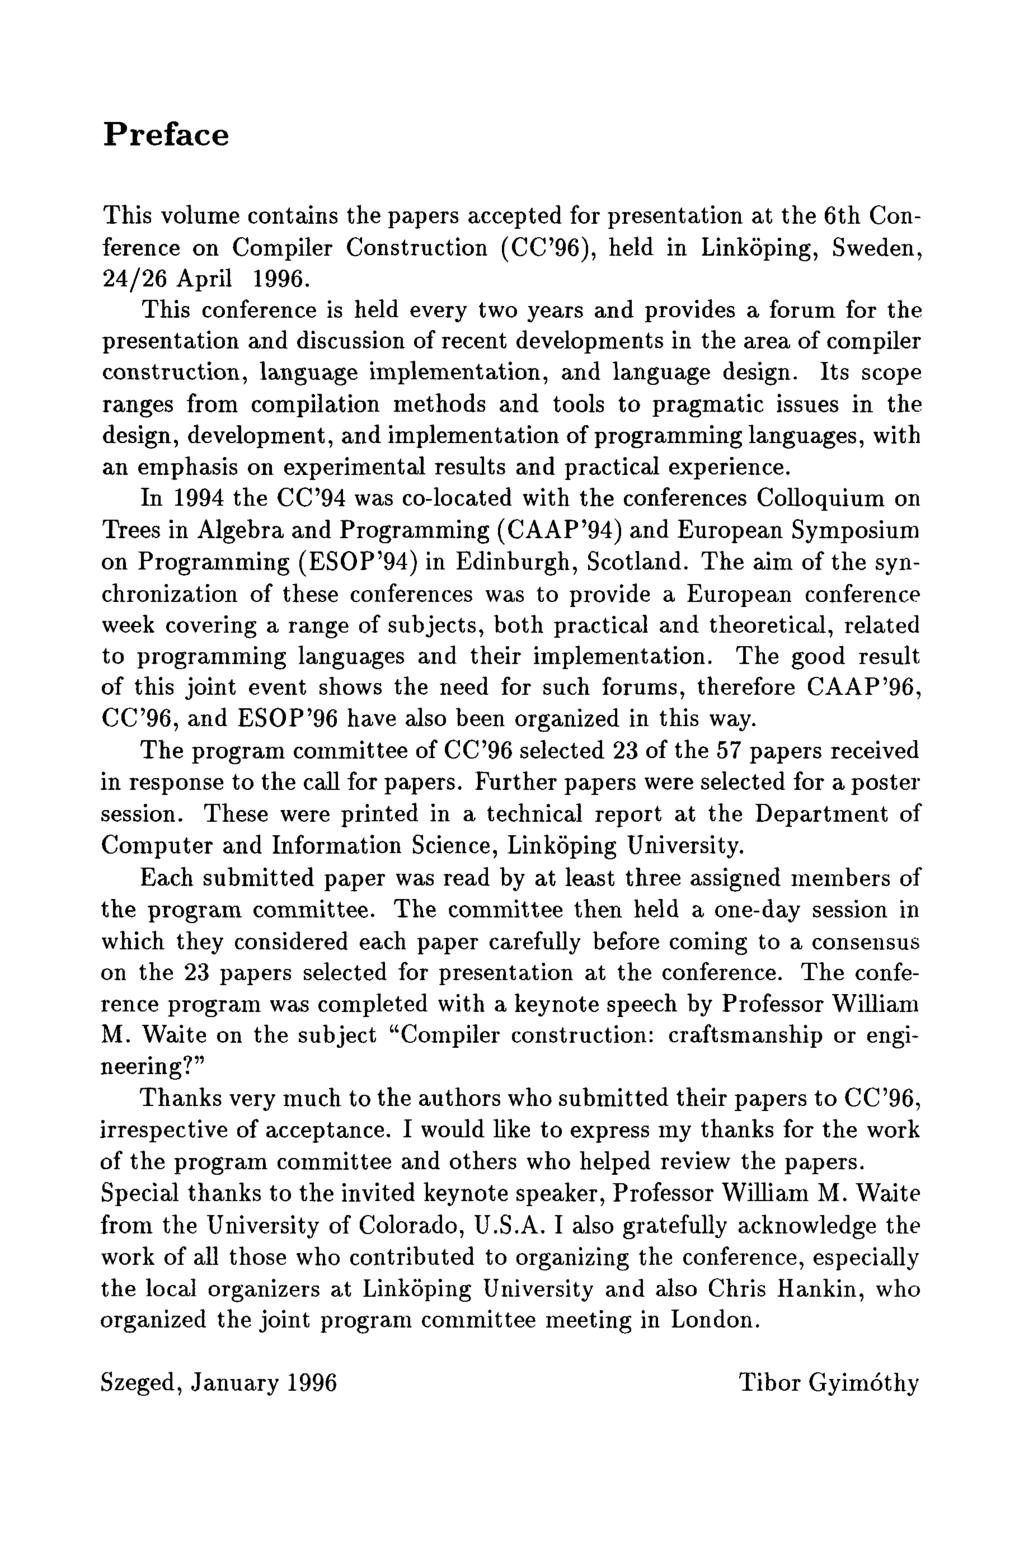 Preface This volume contains the papers accepted for presentation at the 6th Conference on Compiler Construction (CC'96), held in LinkSping, Sweden, 24/26 April 1996.